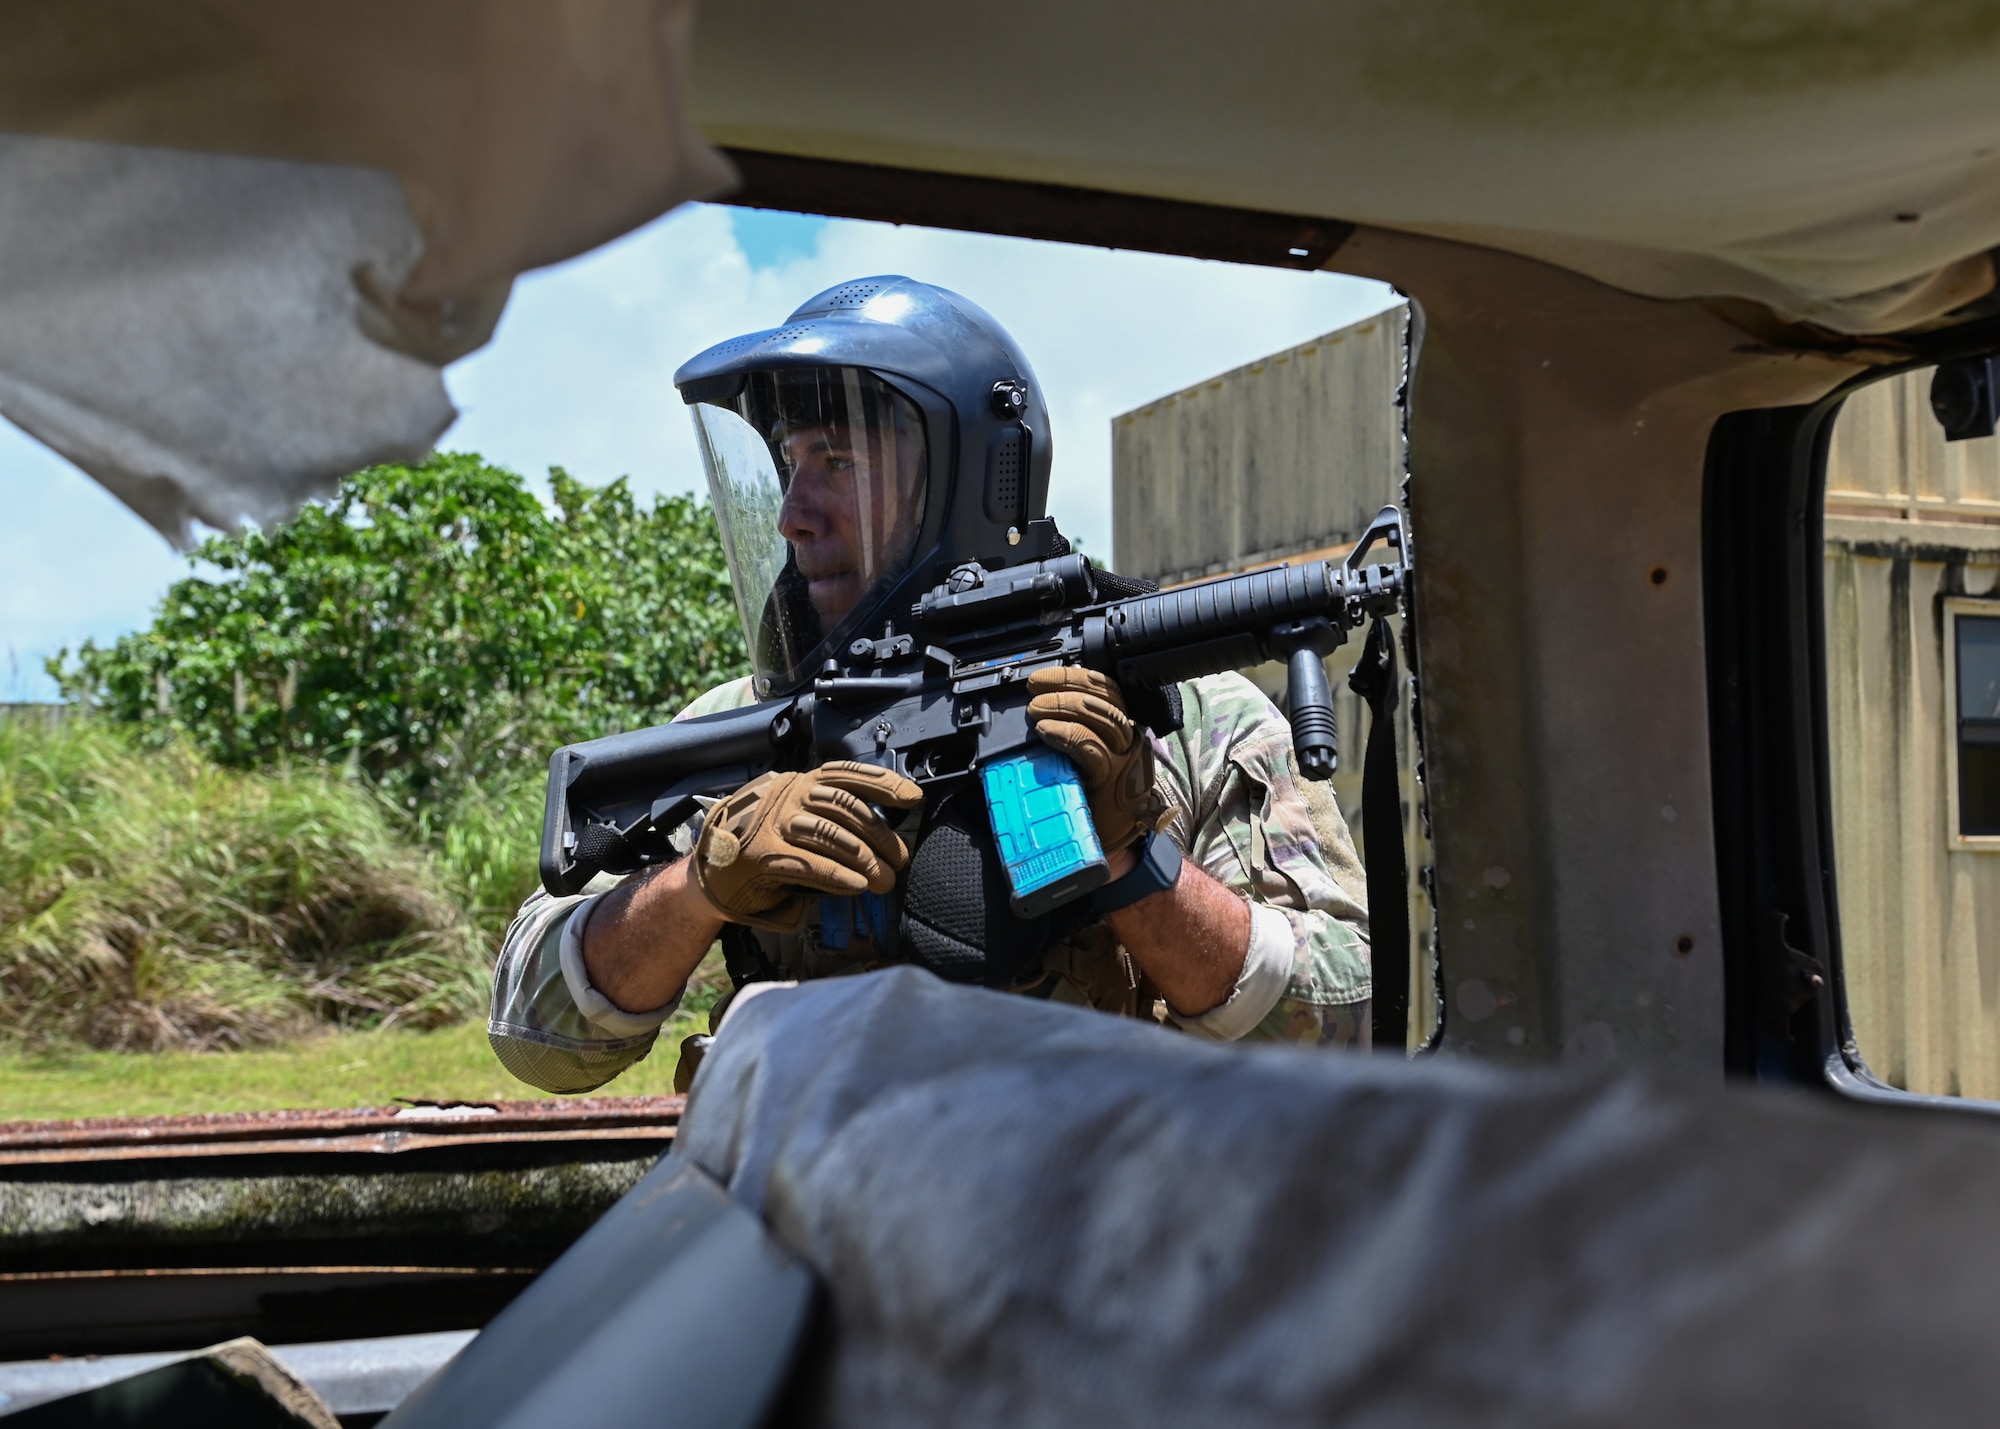 A U.S. Air Force Airman with the 736th Security Forces Squadron exits a simulated town after successfully clearing the buildings of opposing forces during a combat training course at Andersen Air Force Base, Guam, May 3, 2022.